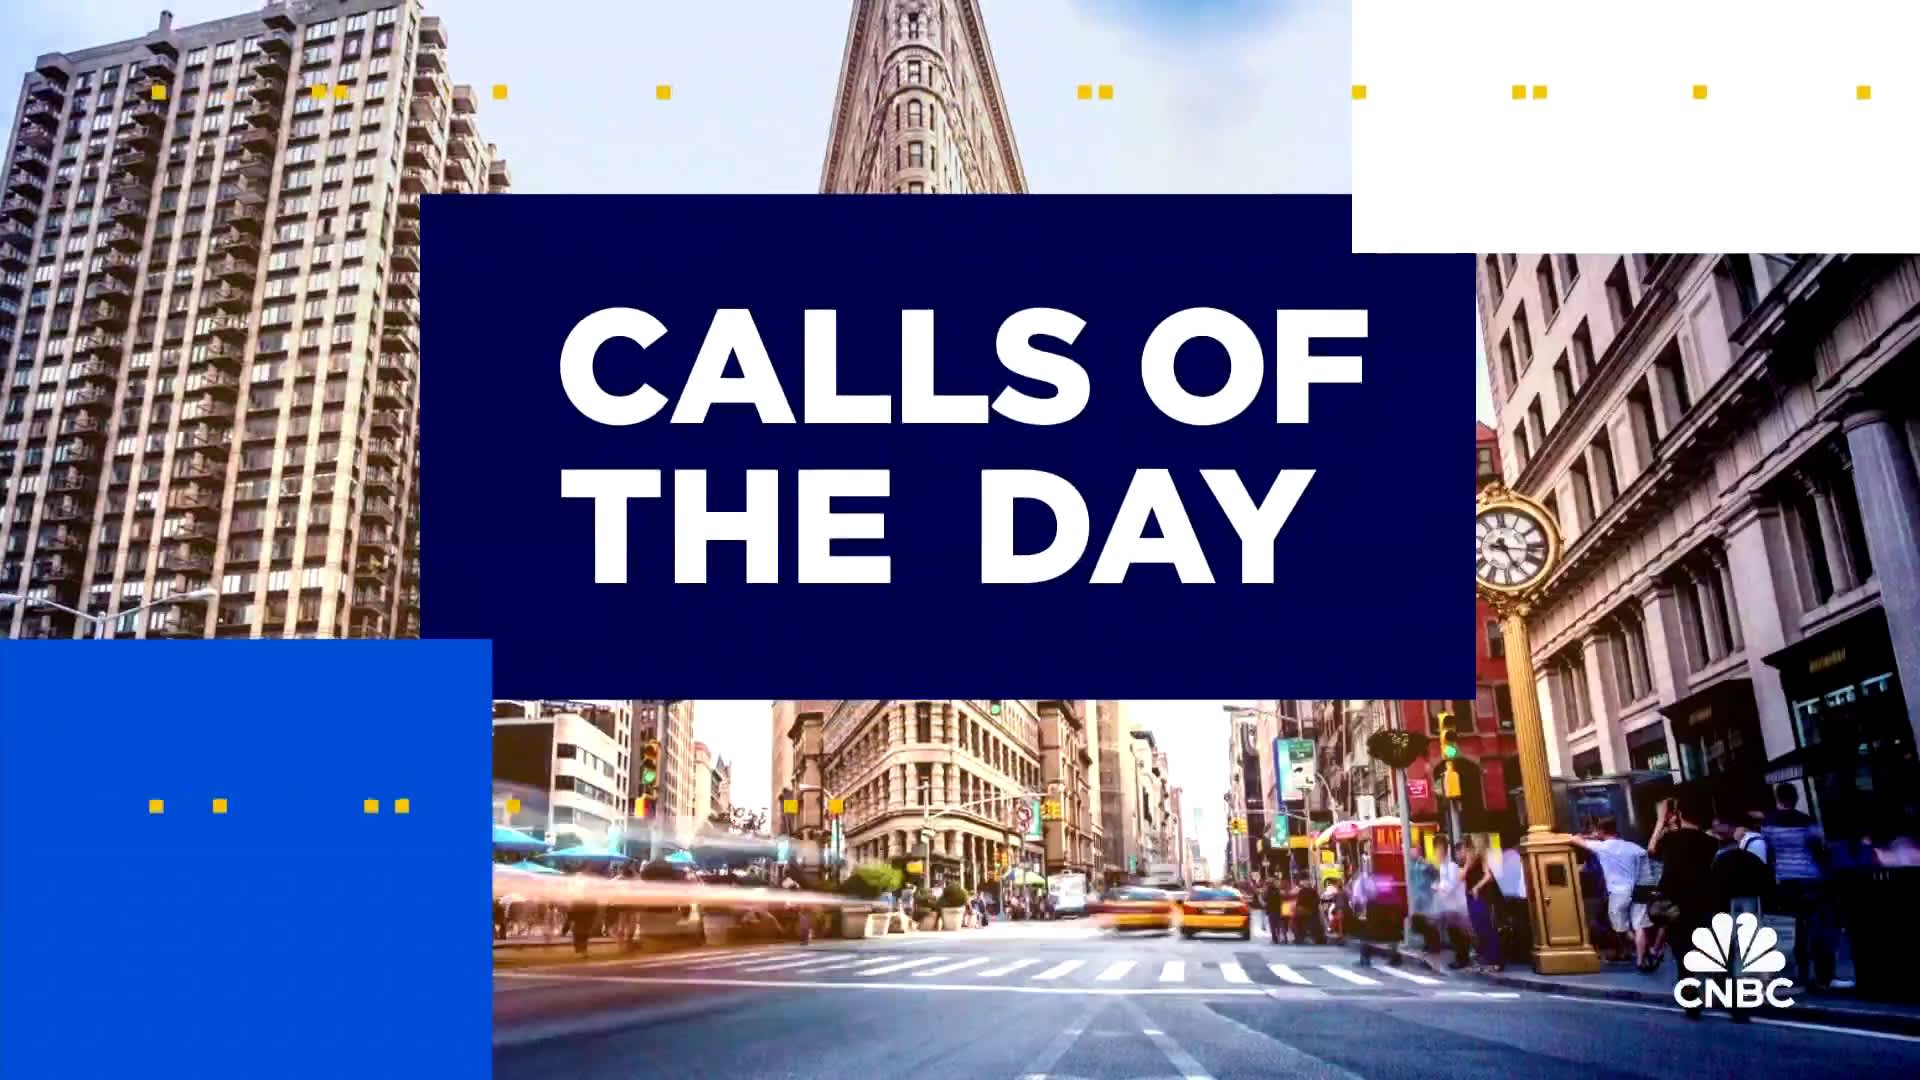 Calls of the Day: Uber, GE Vernova and General Motors - CNBC